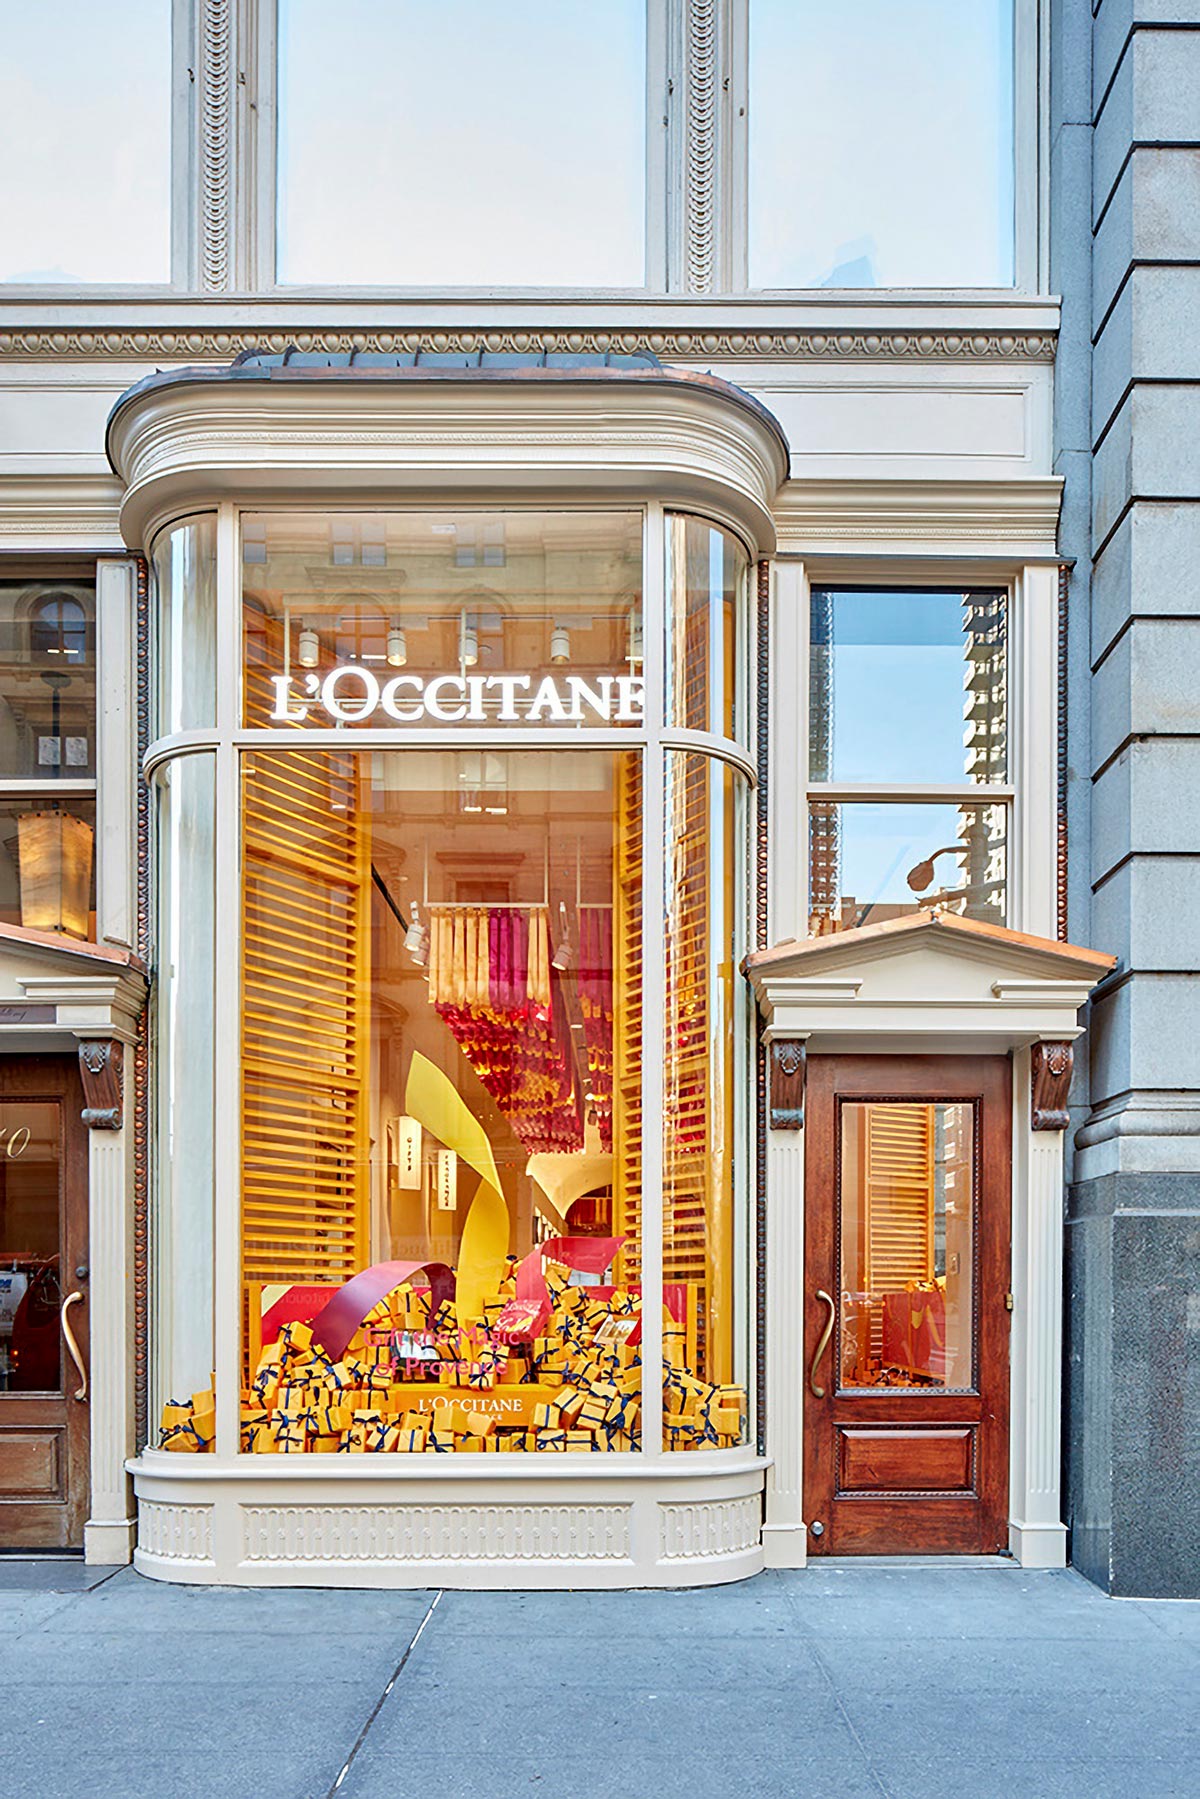 An experiential community store and flagship location in New York City’s L'Occitane Flatiron neighborhood